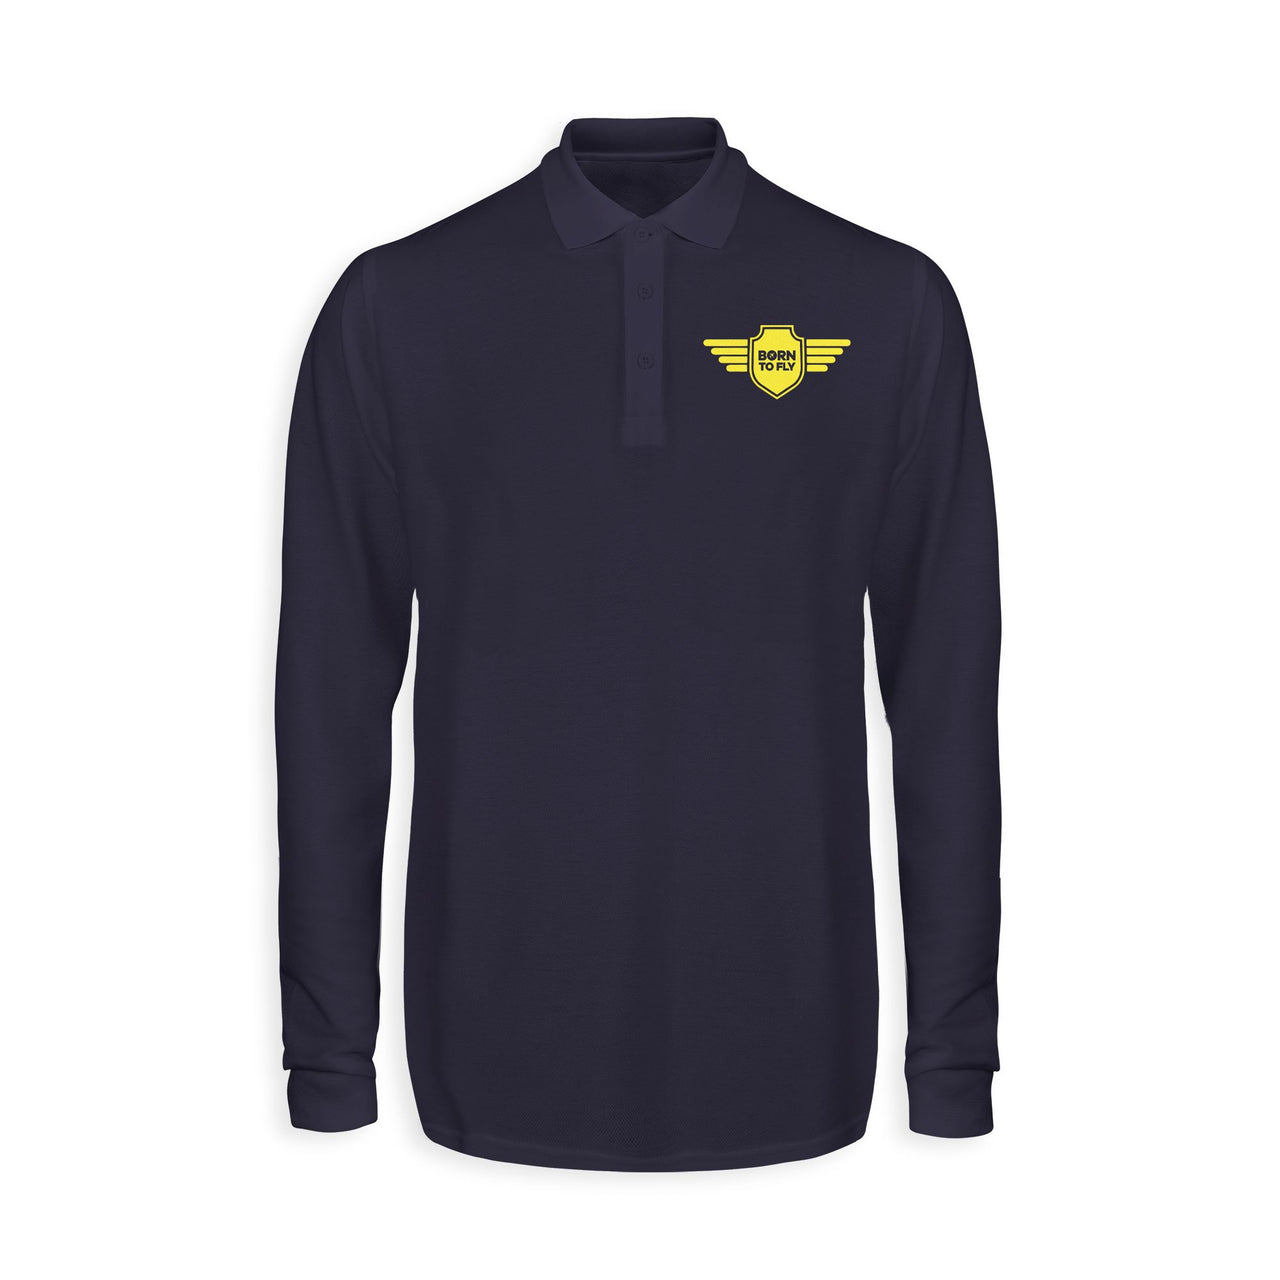 Born To Fly & Badge Designed Long Sleeve Polo T-Shirts